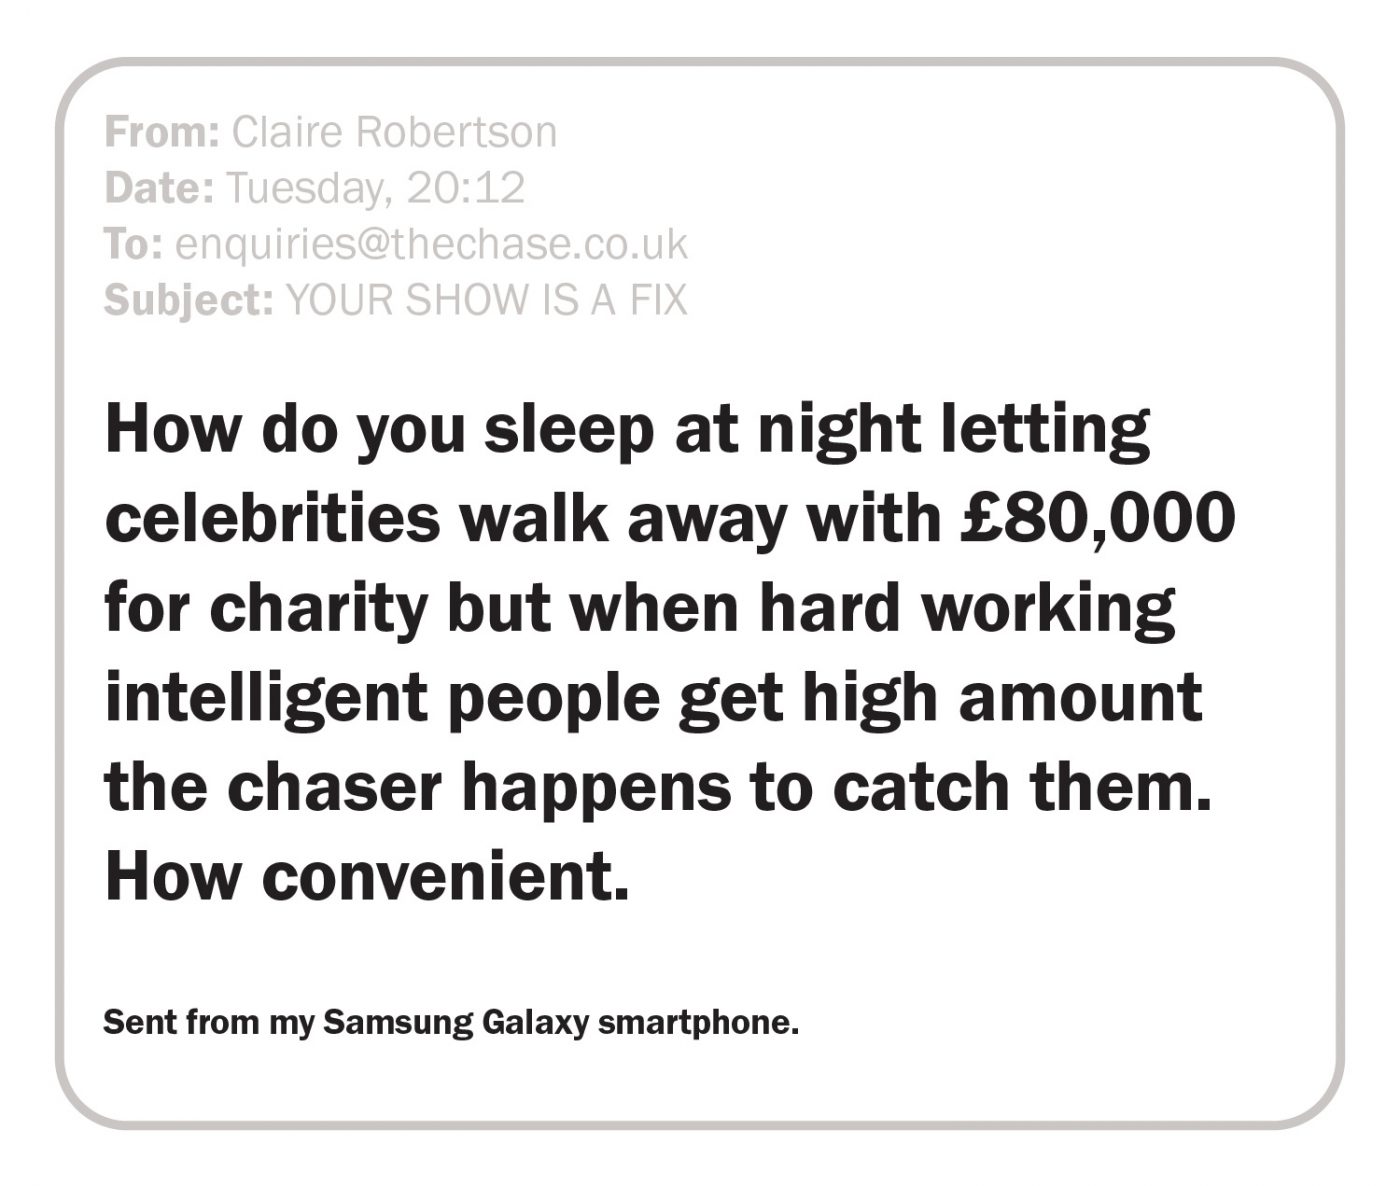 How do you sleep at night letting celebrities walk away with £80,000 for charity but when hard working intelligent people get high amount the chaser happens to catch them. How convenient. Sent from my Samsung Galaxy smartphone.